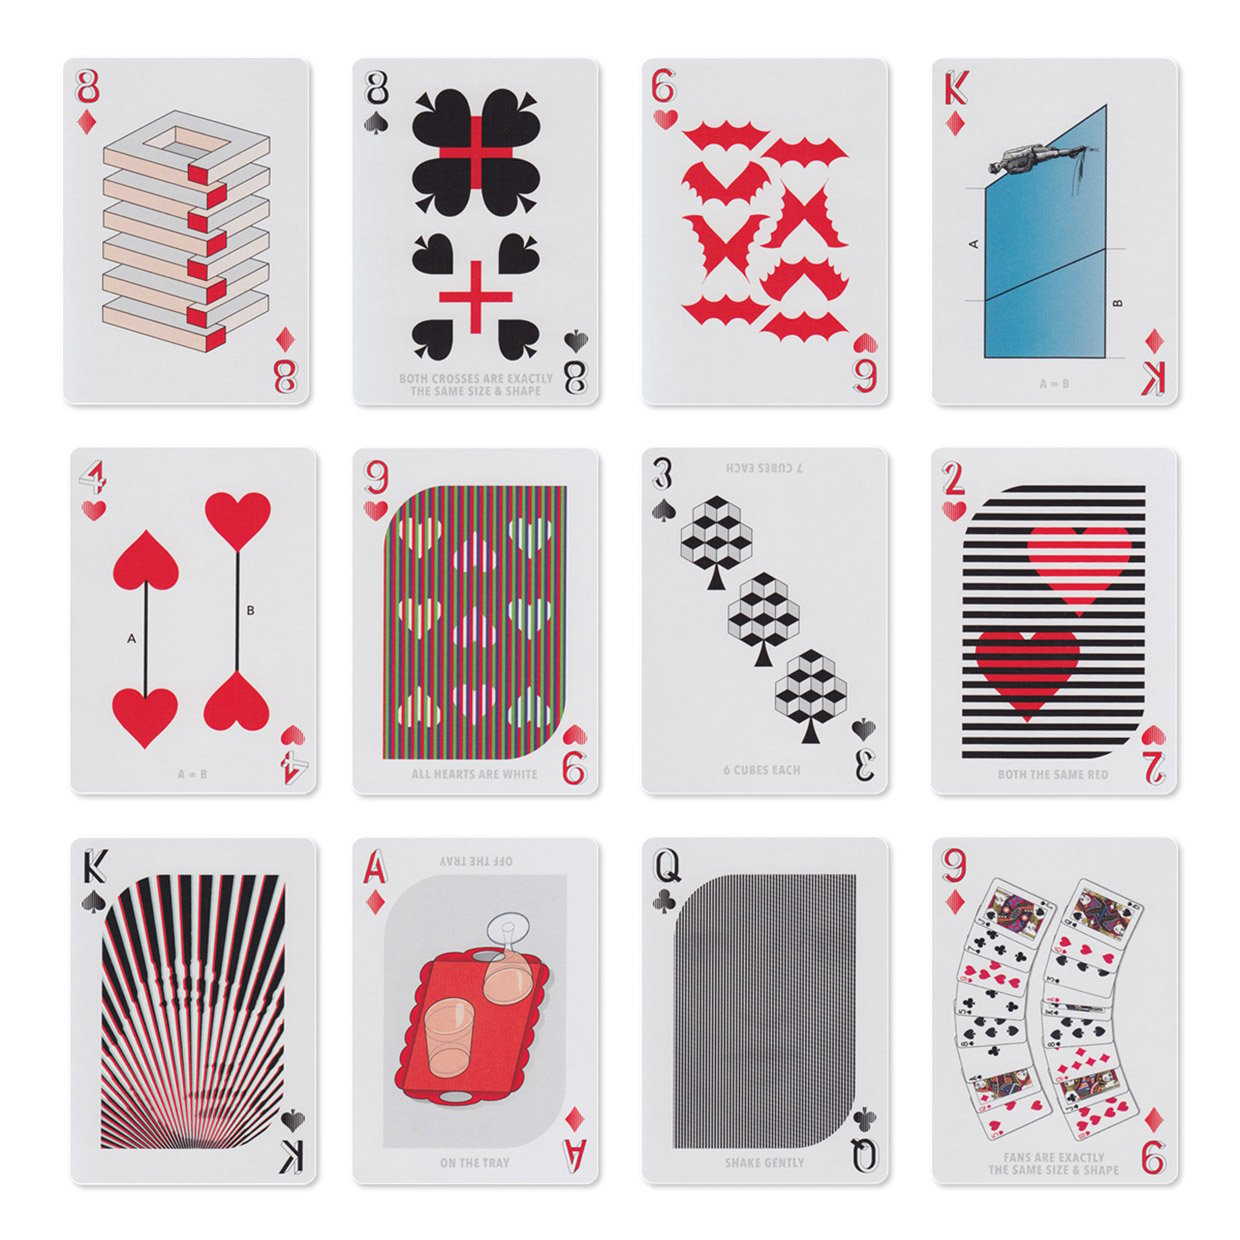 Illusion d’Optique Playing Cards